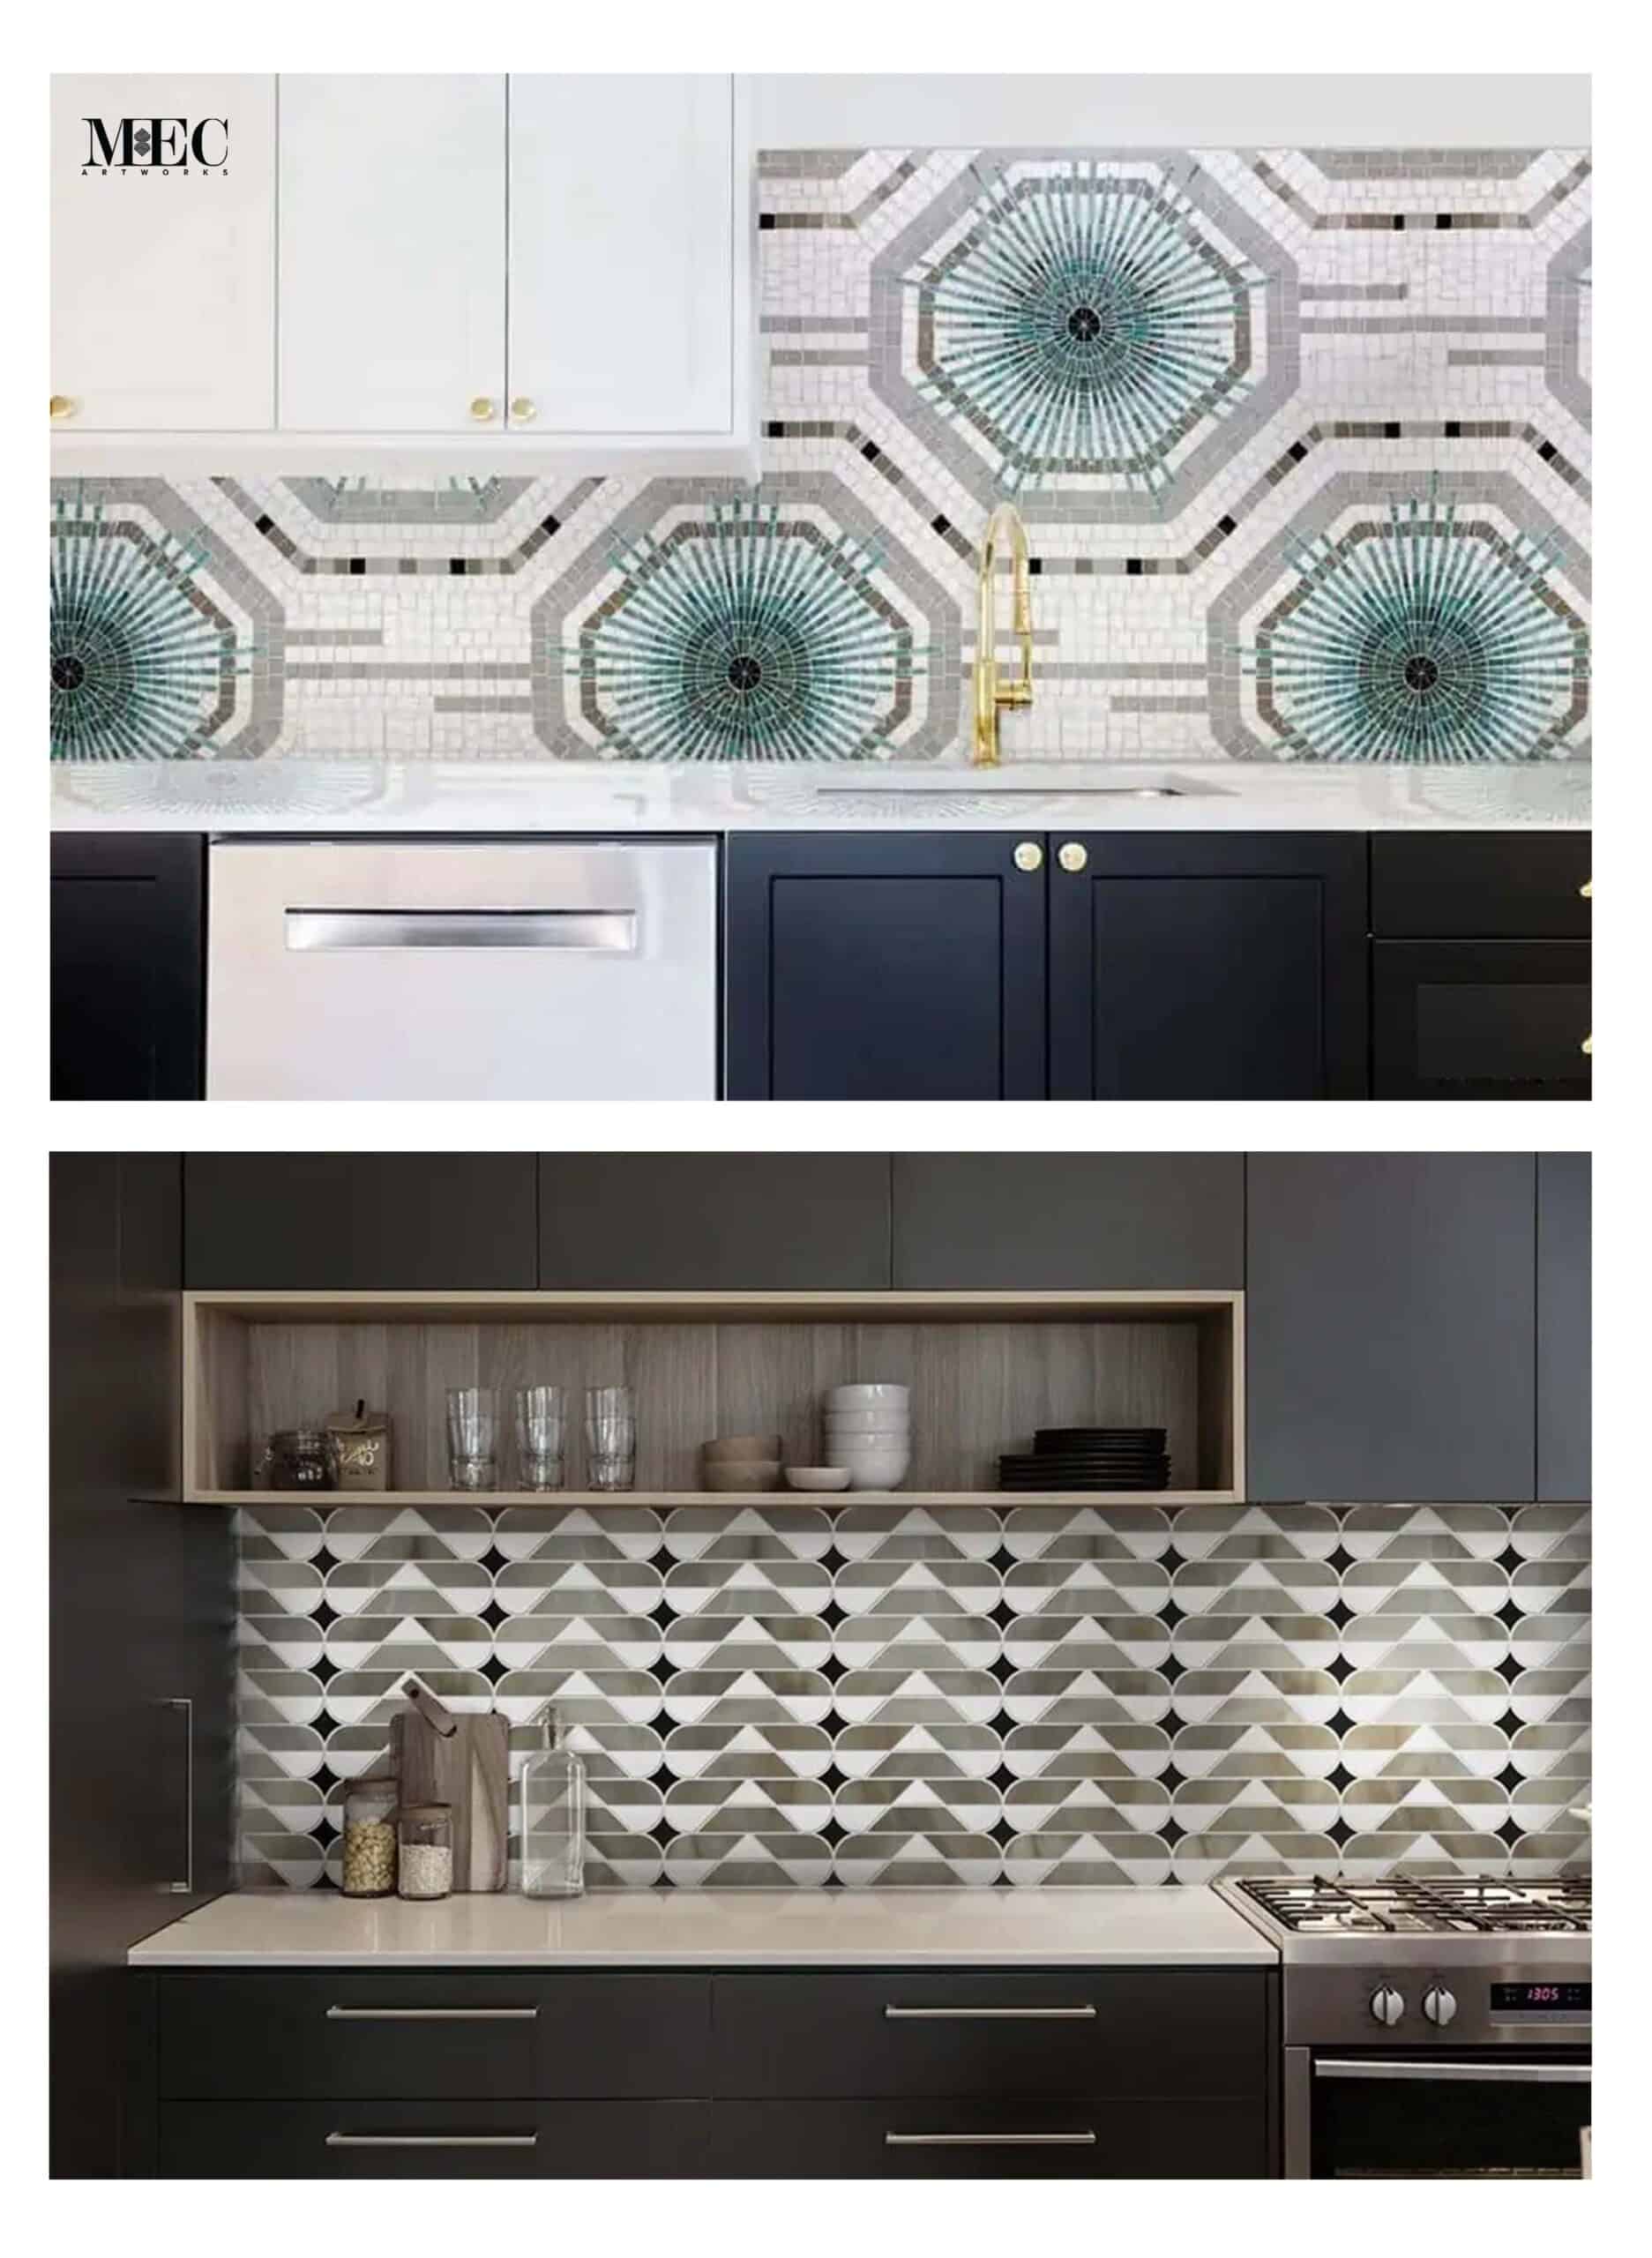 Two kitchen backsplash designs seen in modern kitchens. The top image features a geometric mosaic backsplash with an intricate pattern in shades of gray and turquoise. The bottom image shows a geometric triangle tiled backsplash in shades of gray and white.